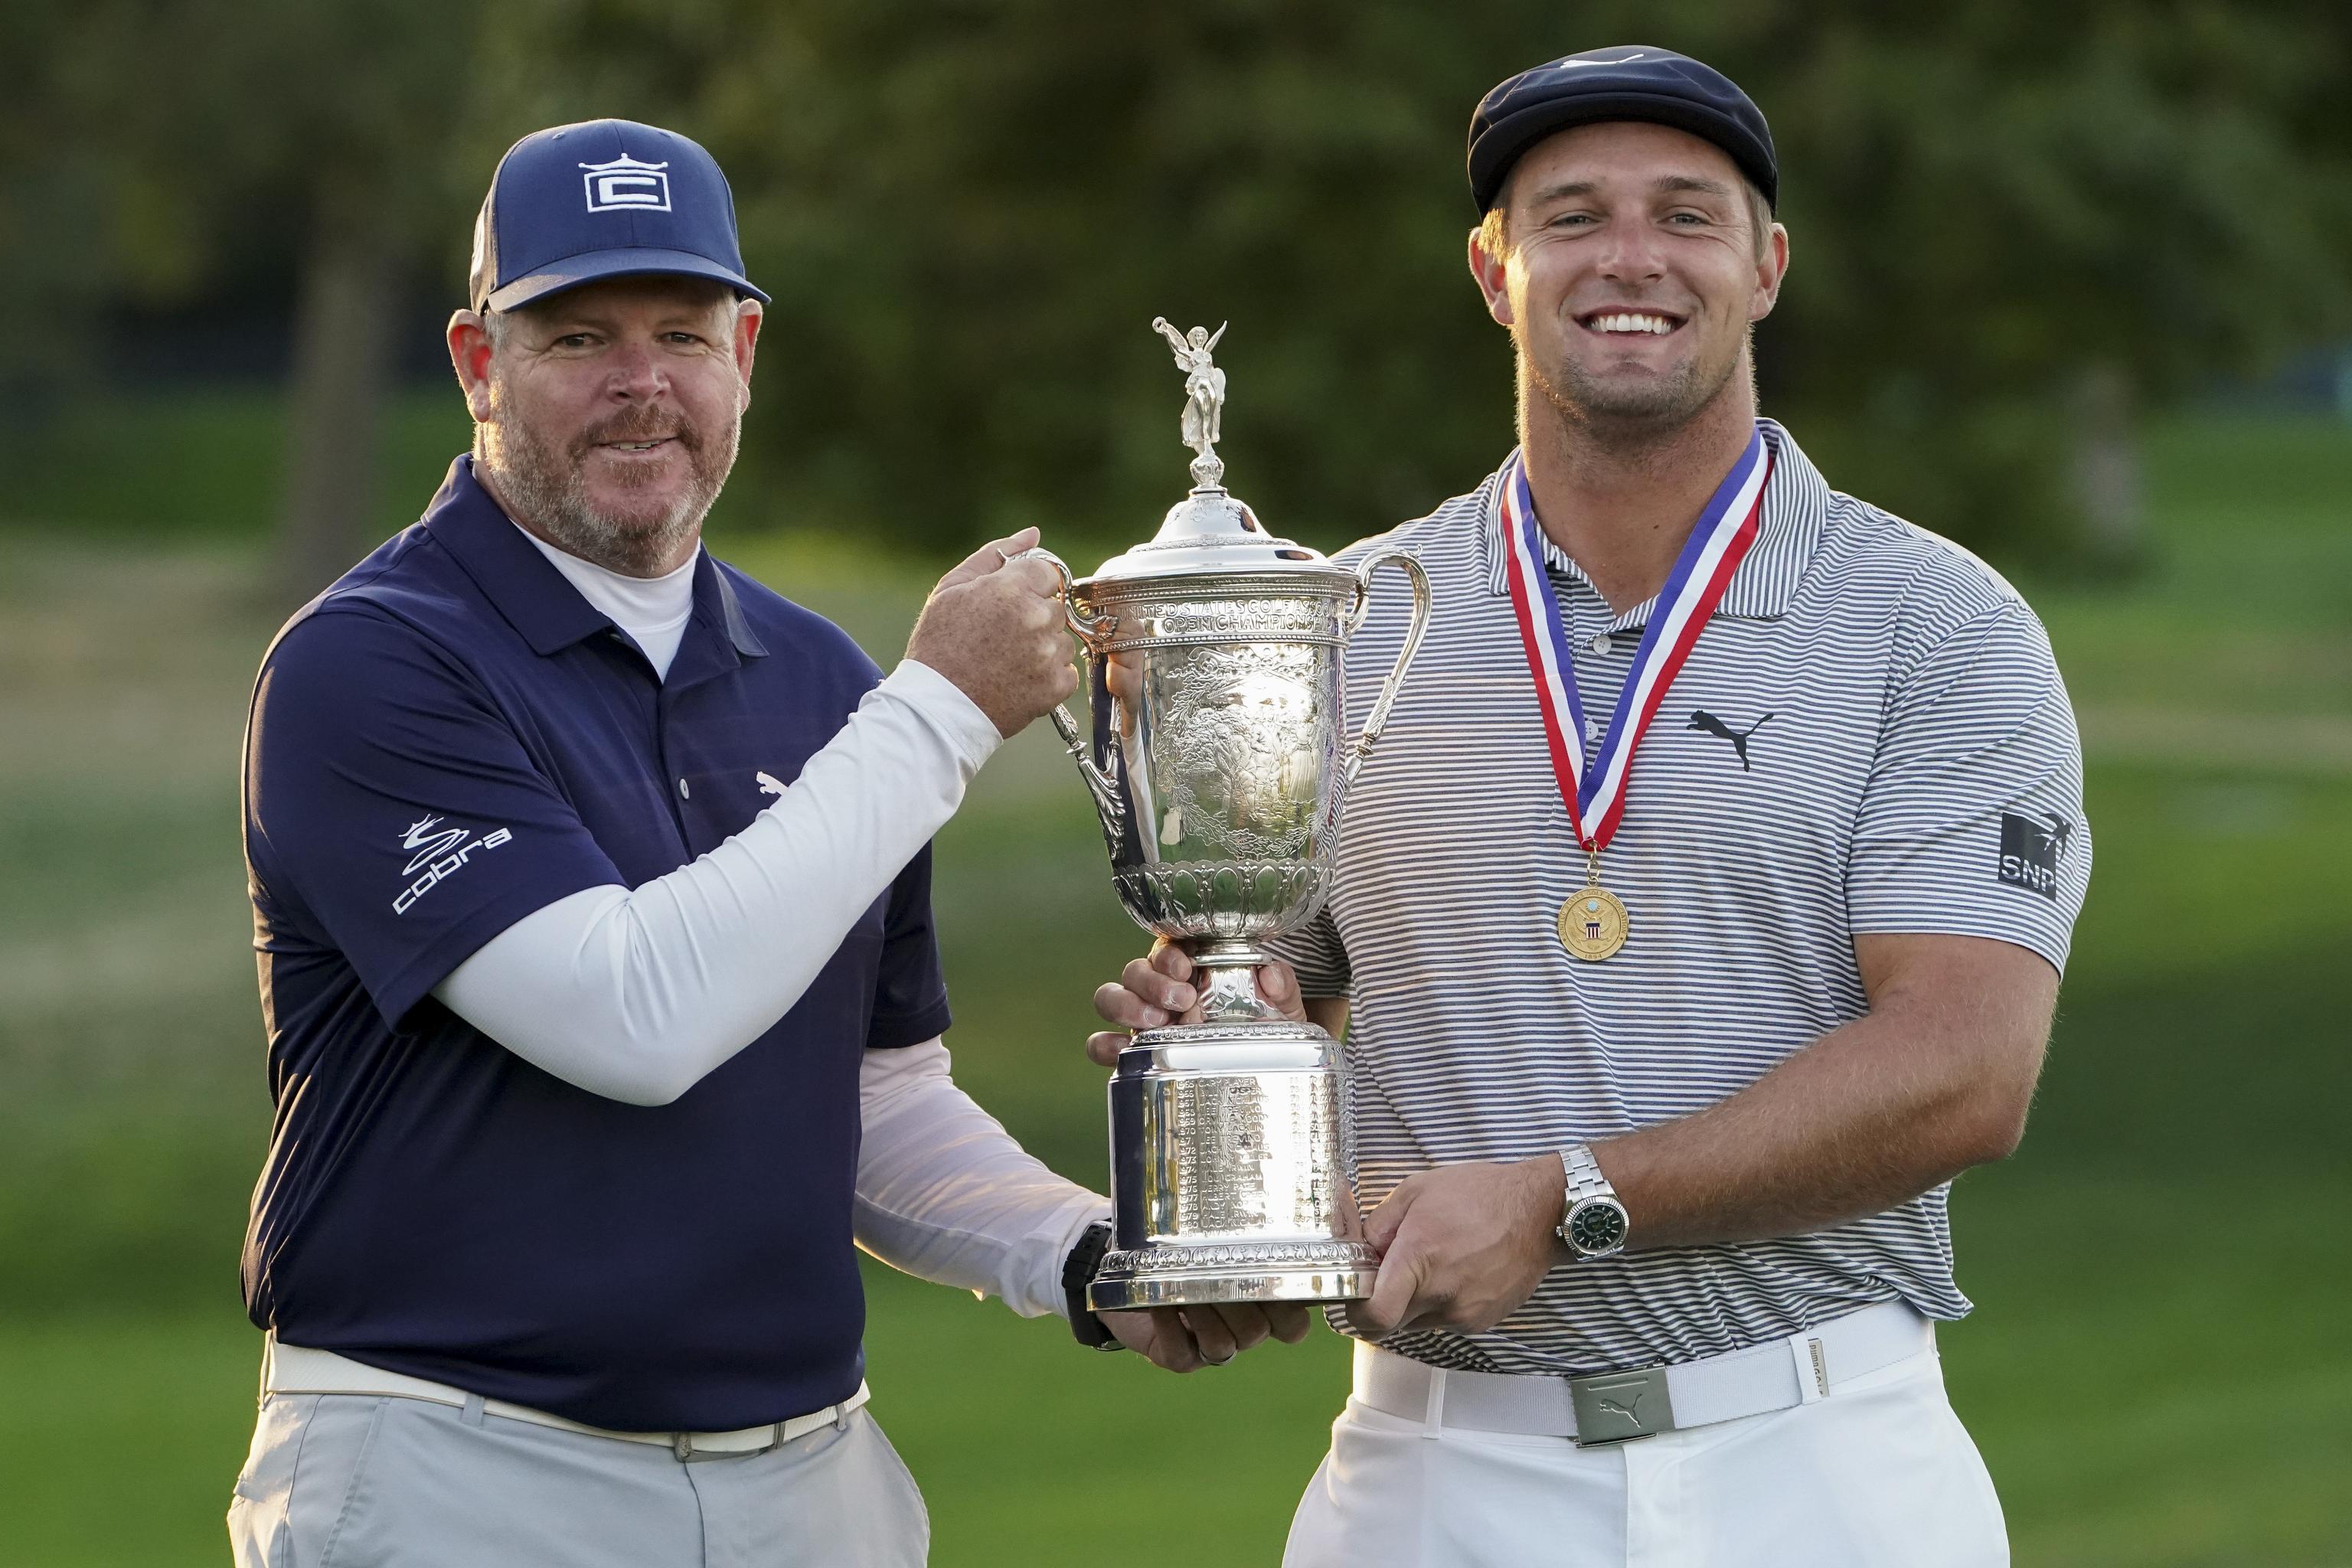 Us Open Golf Purse 2020 Prize Money Payout For Top Players On Final Leaderboard Bleacher Report Latest News Videos And Highlights